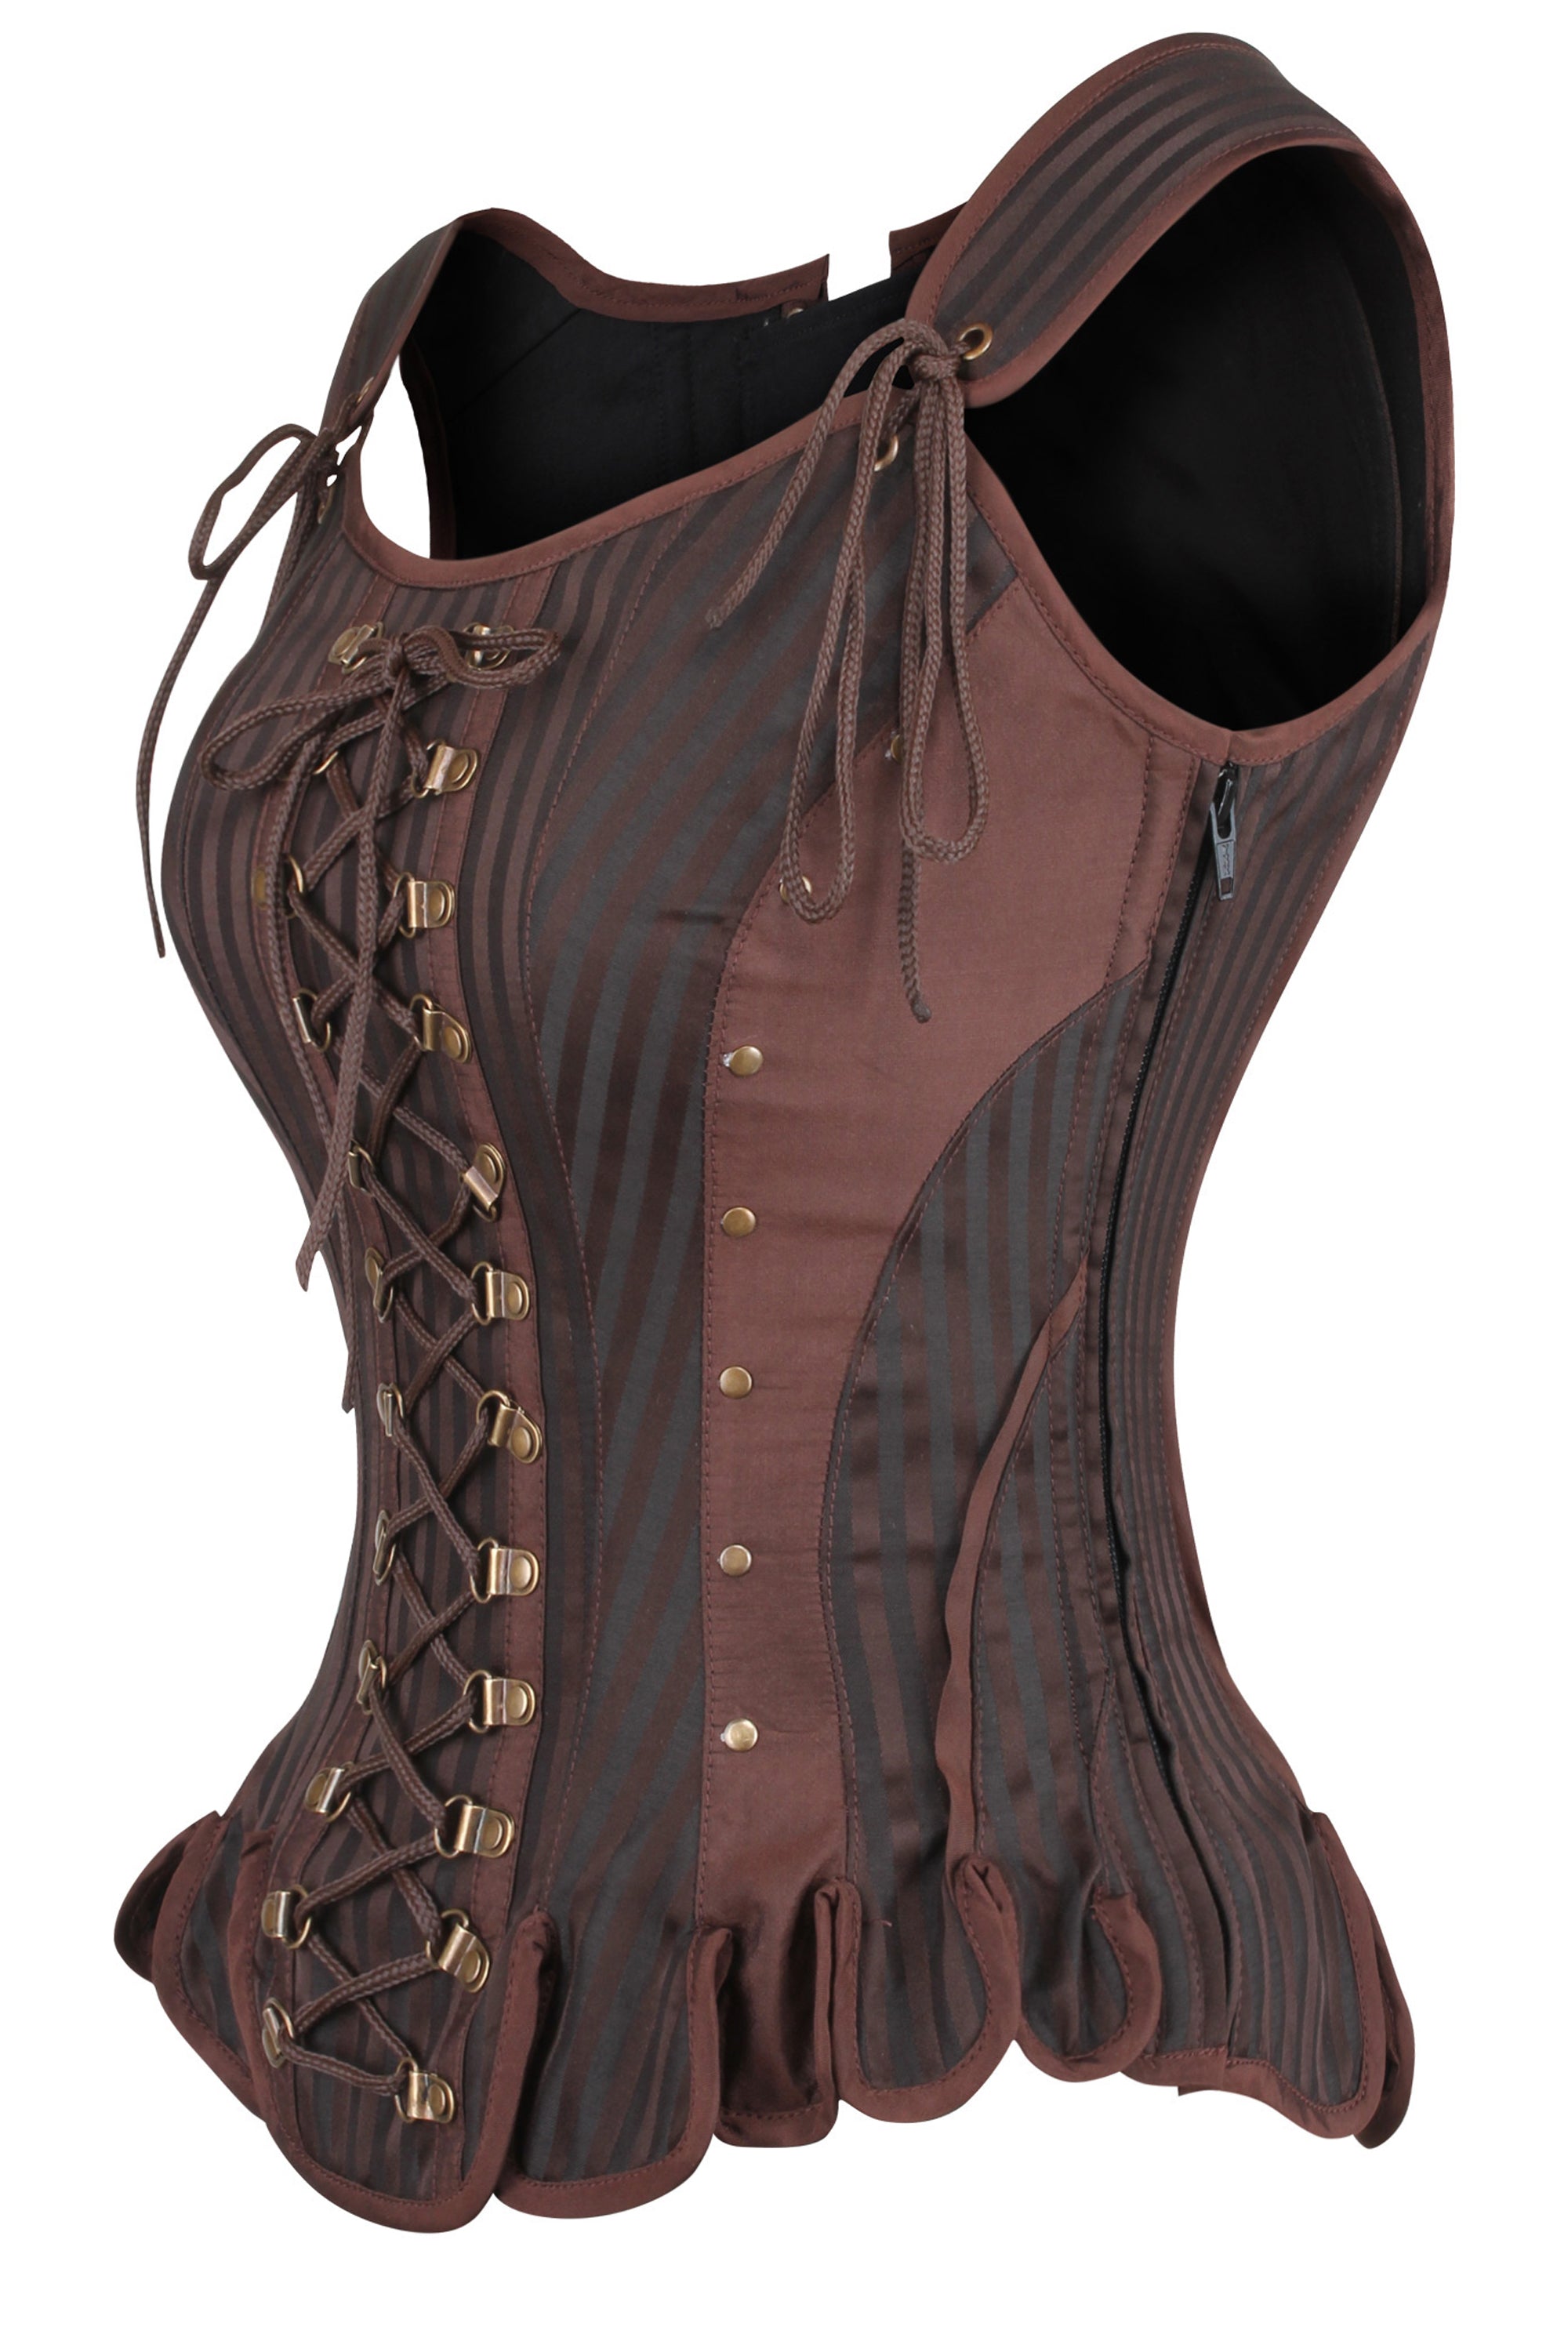 Medieval and LARP Handmade Genuine Full Size Leather Corset at Rs